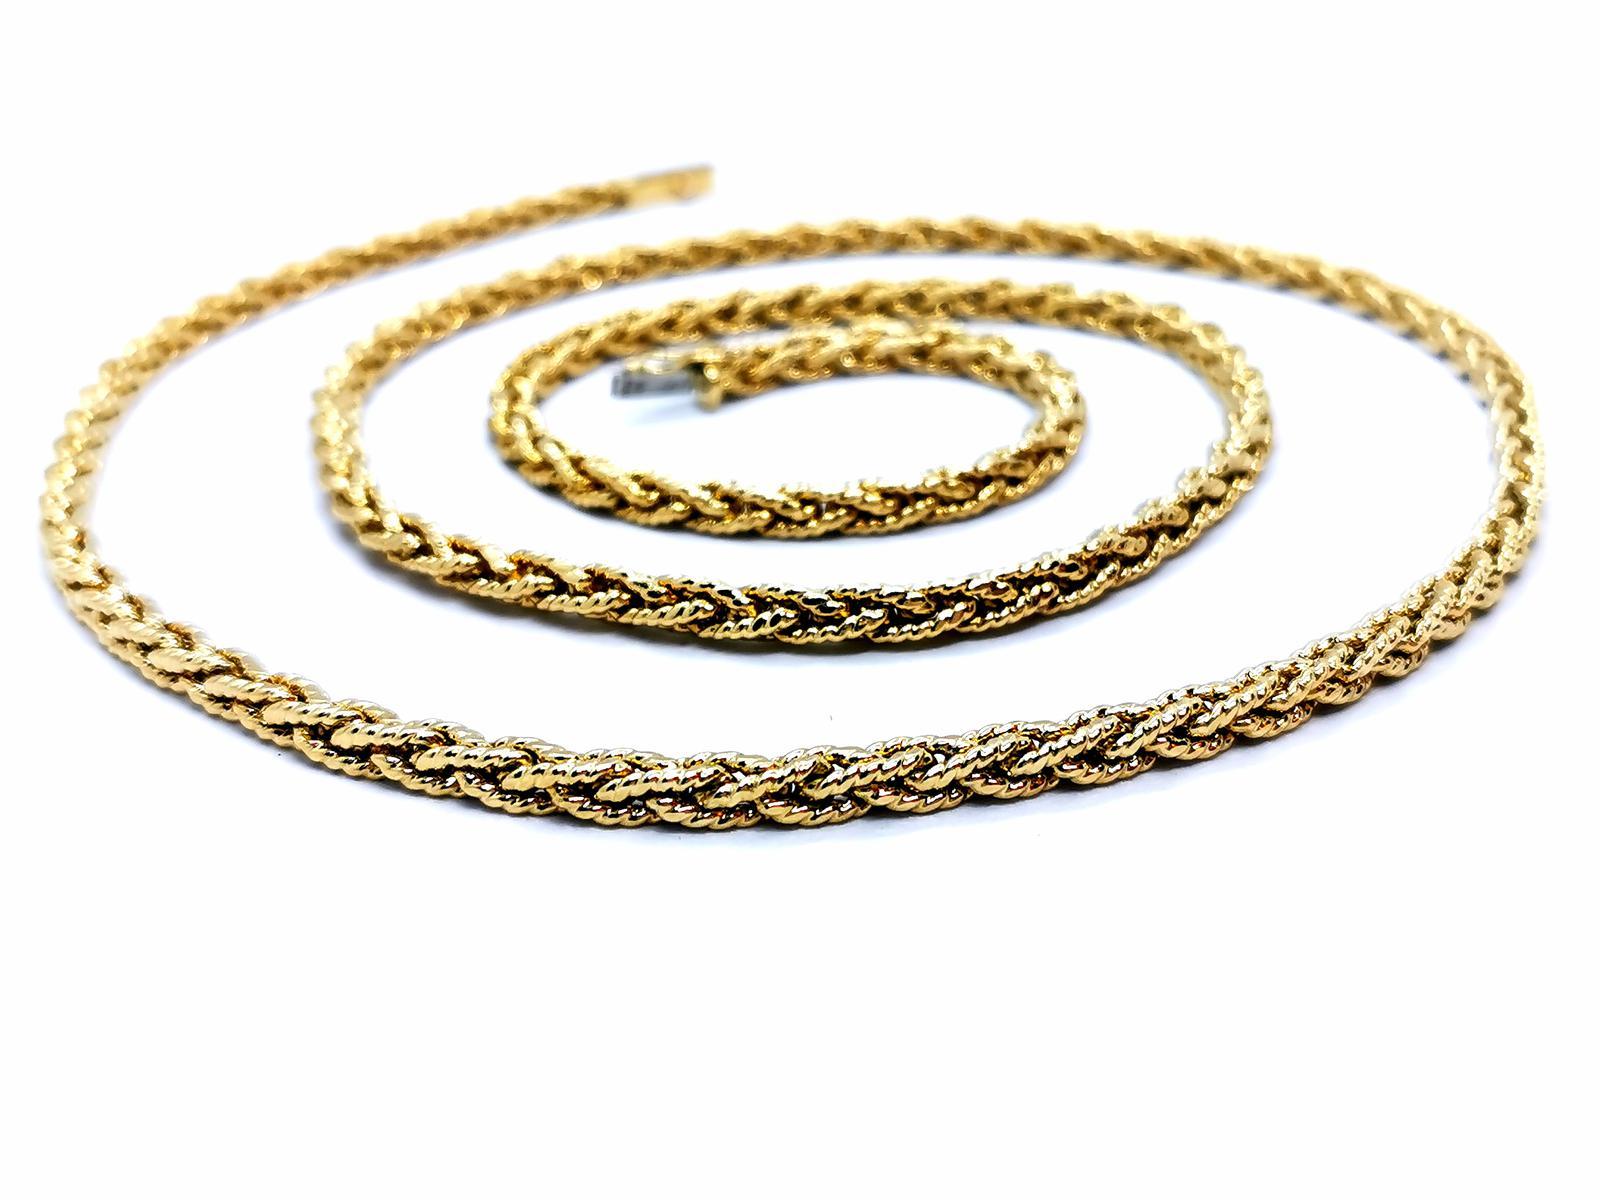 Long necklace. golden yellow 750 mils (18 carats). pretty mesh worked. twisted and braided. length: 81 cm. width: 0.38 cm. with eight safety clasp. total weight: 62.21 g. punched. Excellent state
